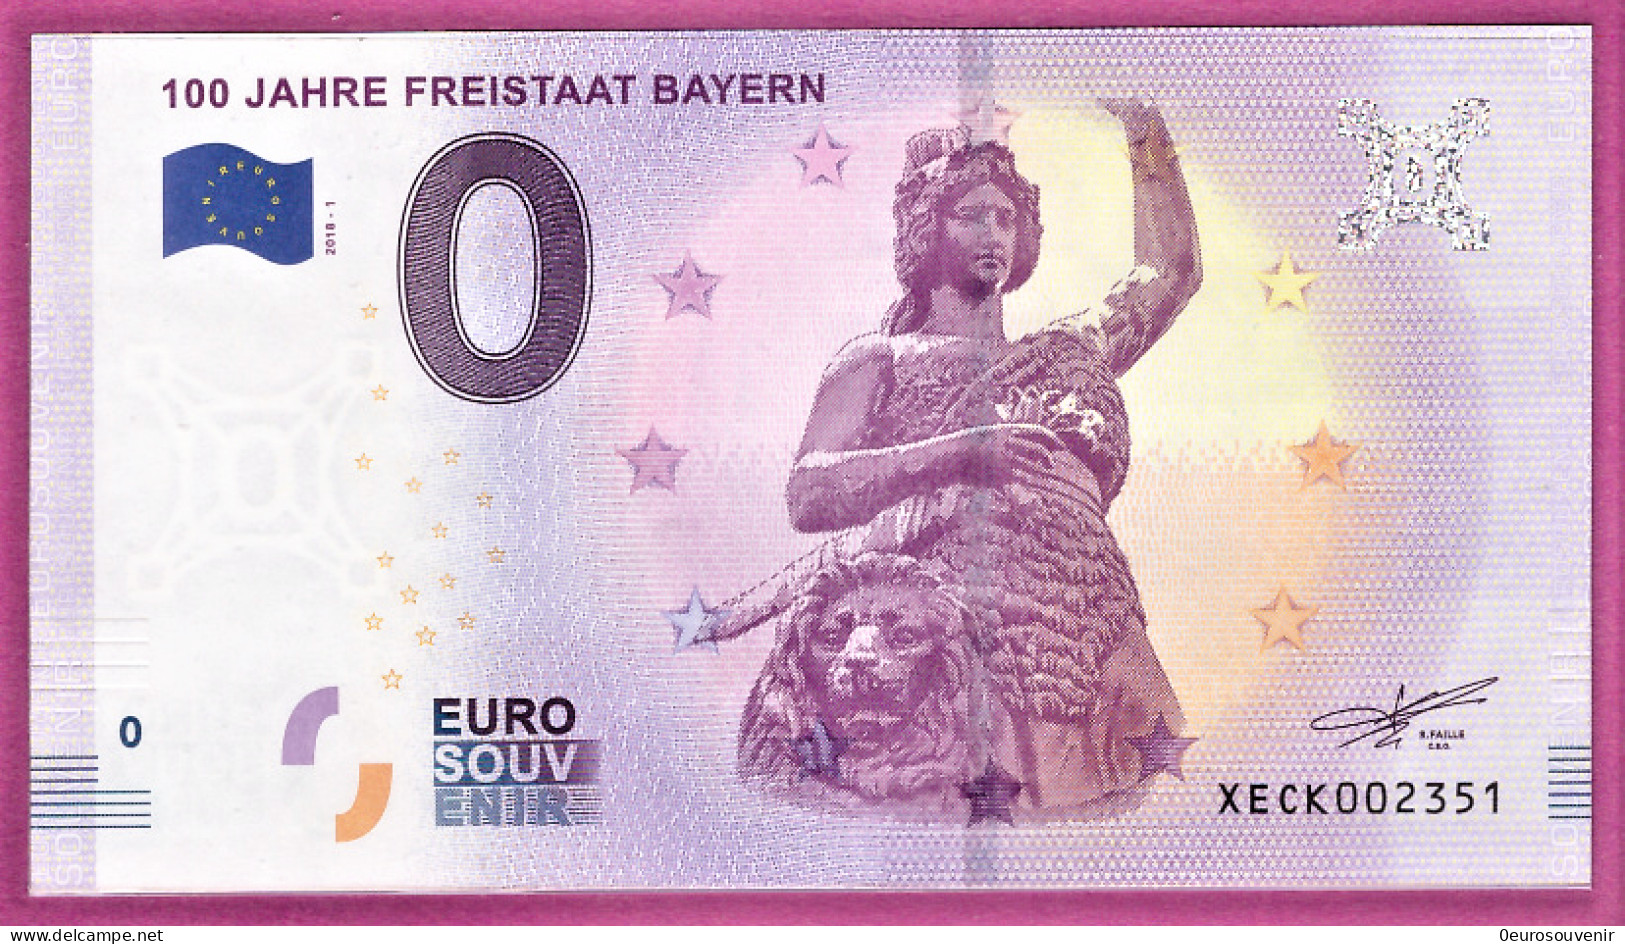 0-Euro XECK 2018-1 100 JAHRE FREISTAAT BAYERN - Private Proofs / Unofficial